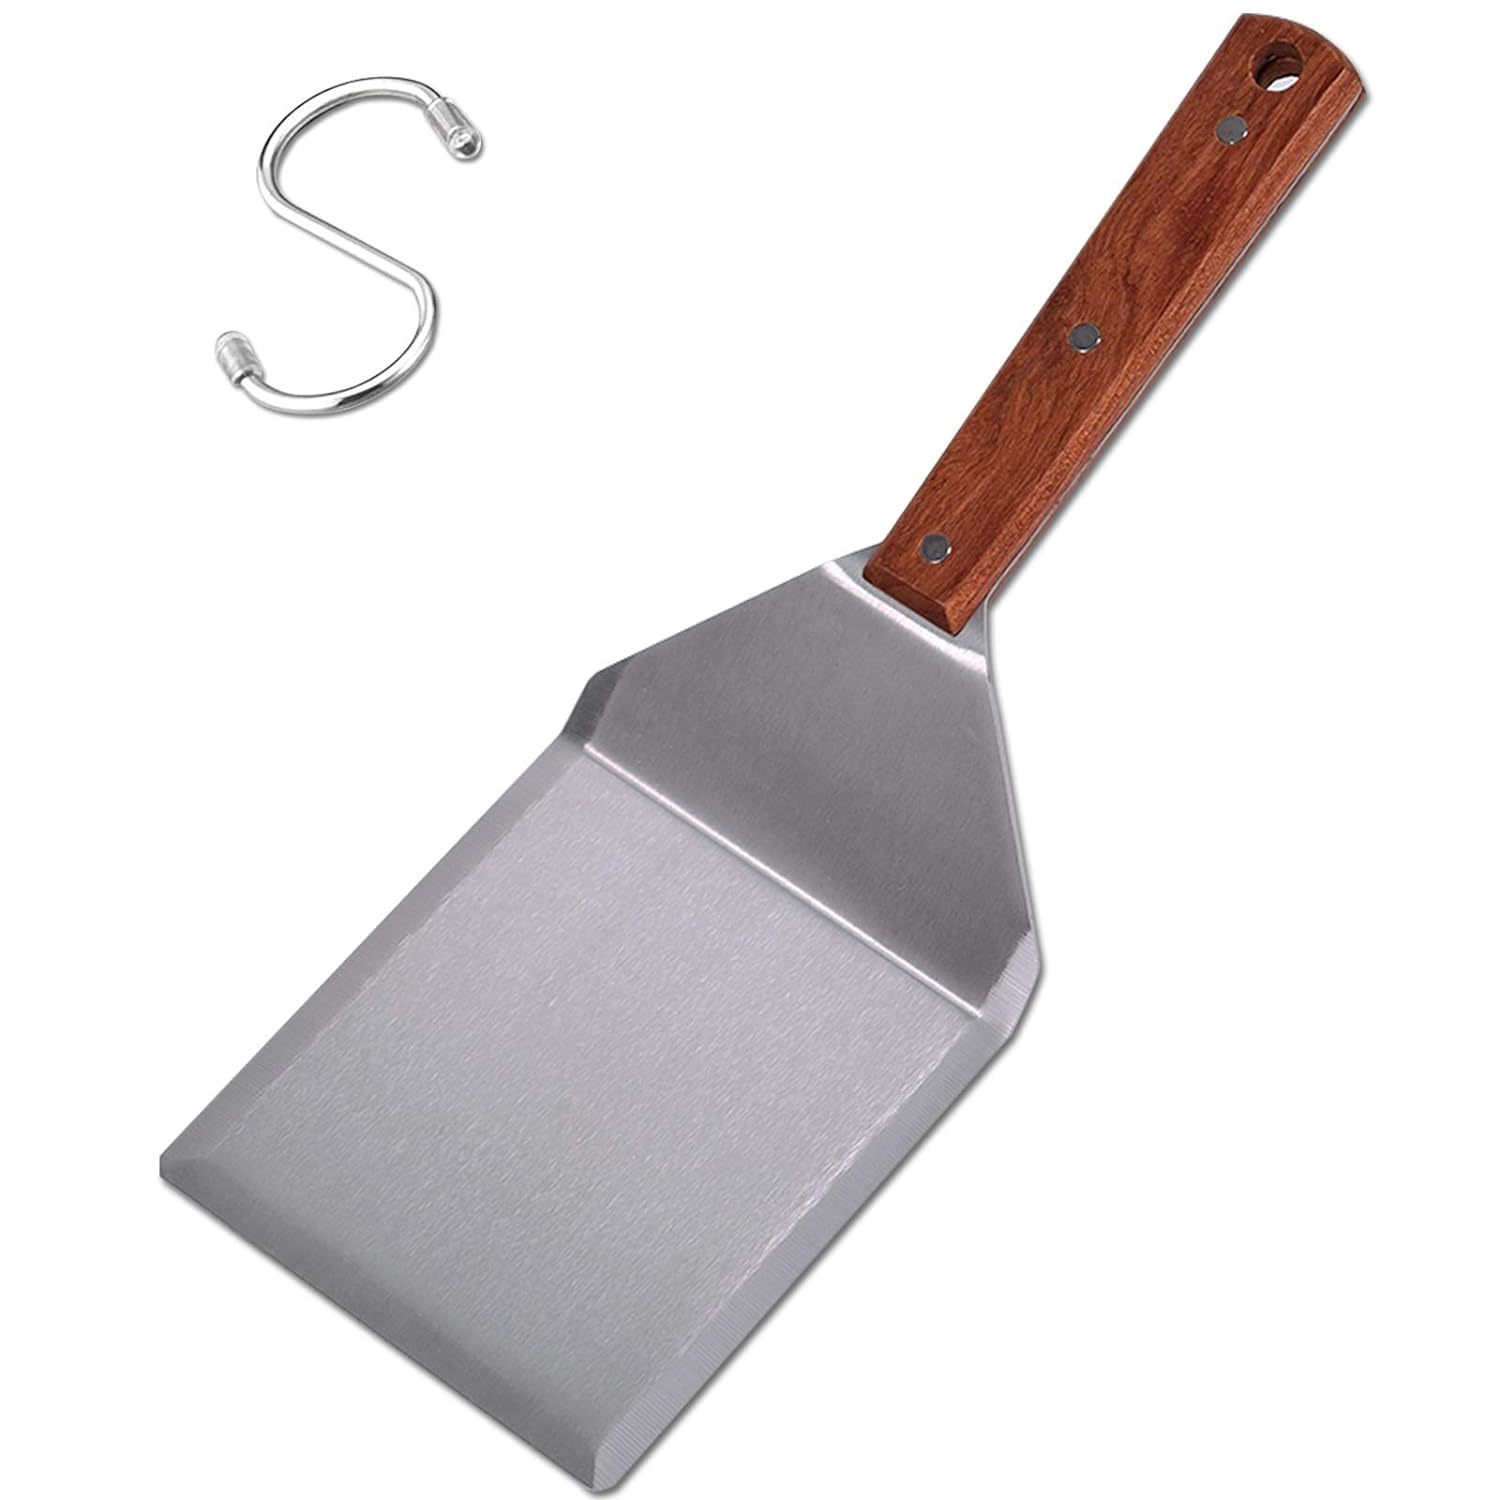 Primary image for Stainless Steel Griddle Hamburger Spatula With Strong Wooden Handle, 13.5 X 5 In